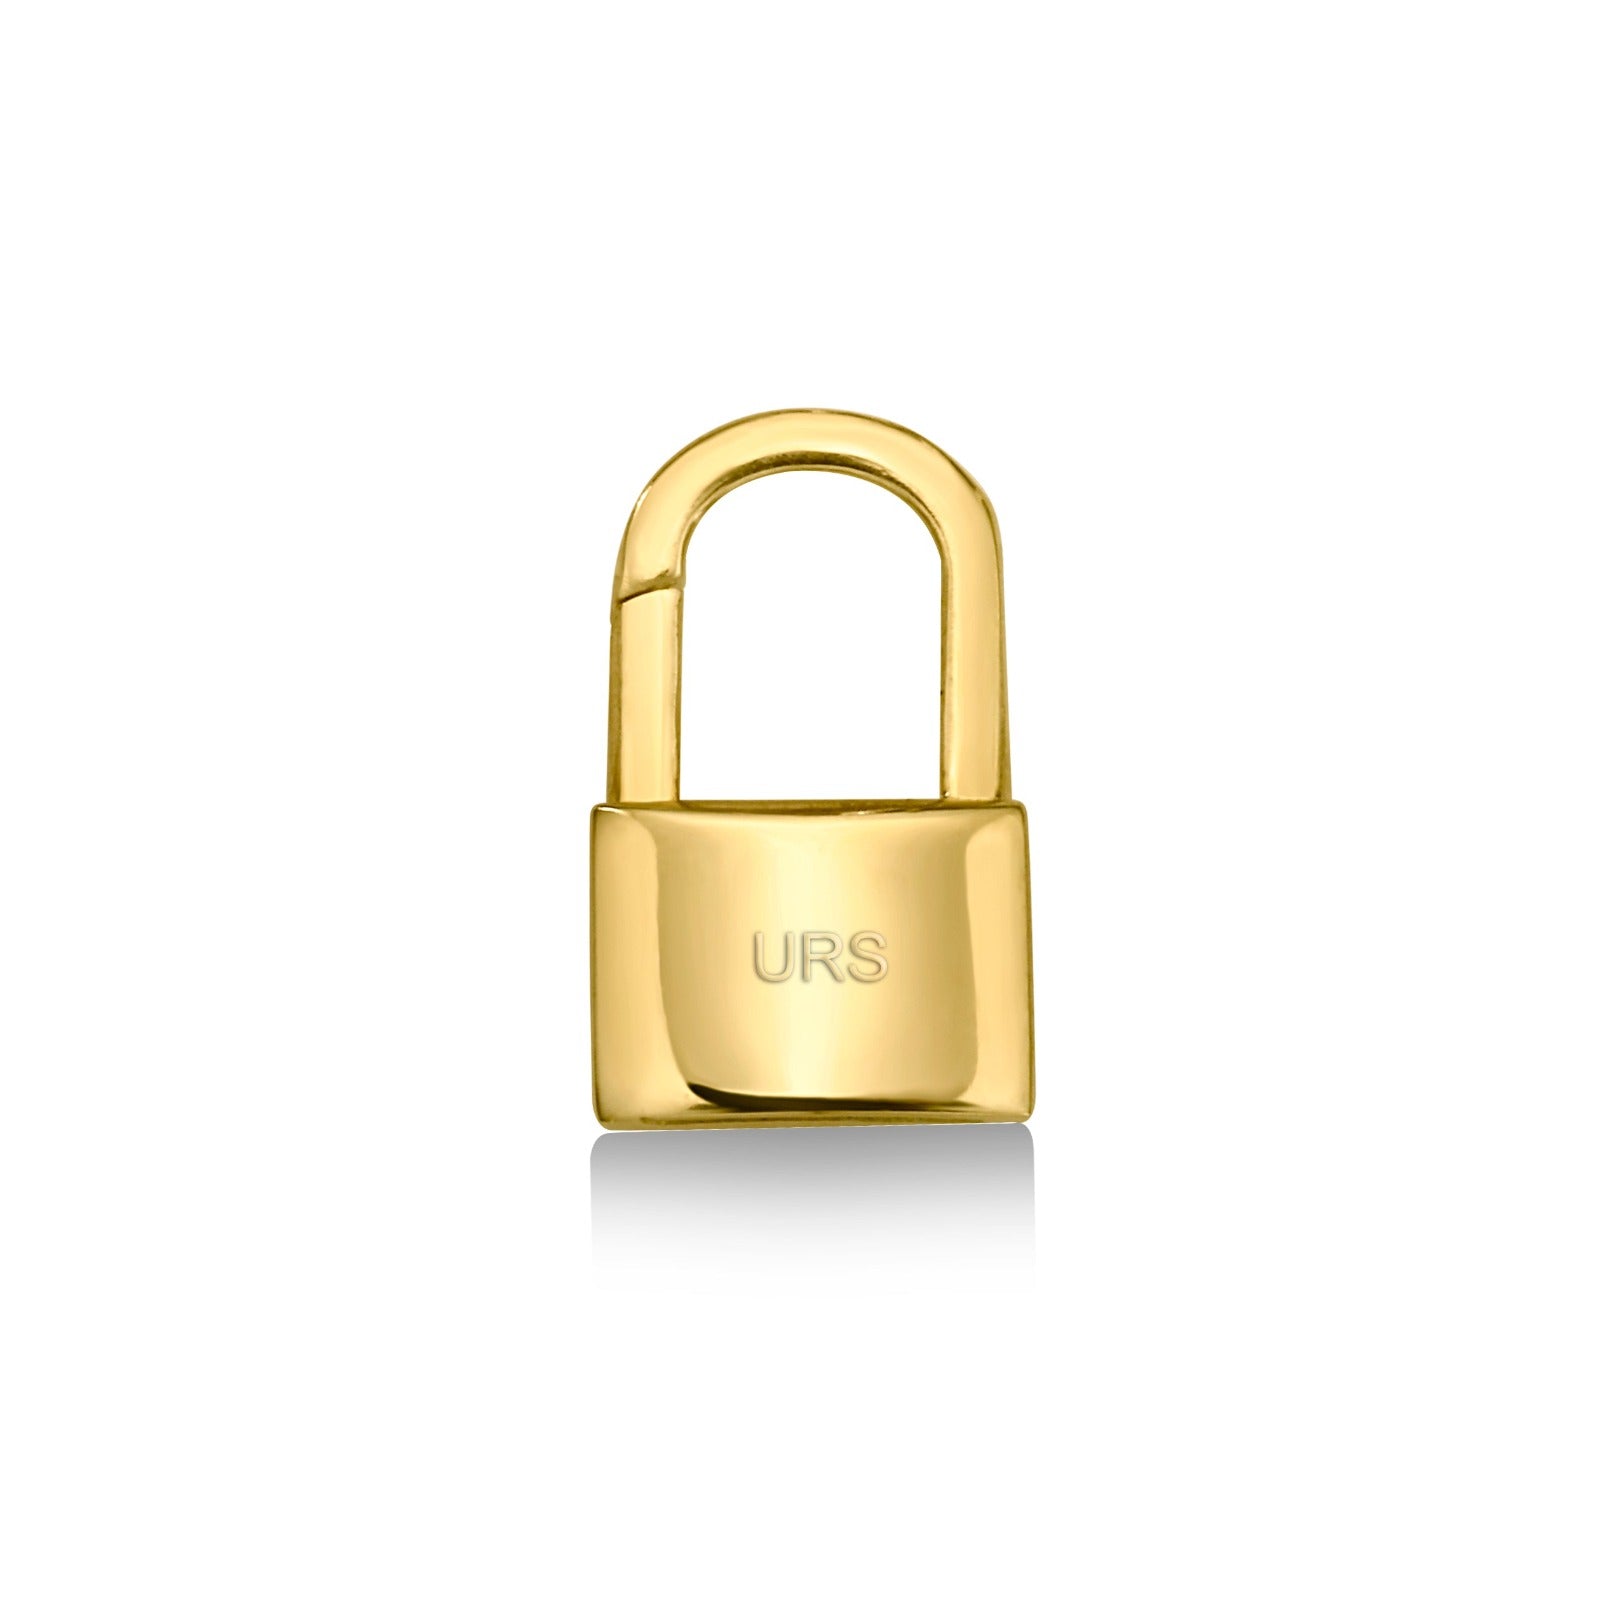 14k yellow gold padlock charm with URS engraved.